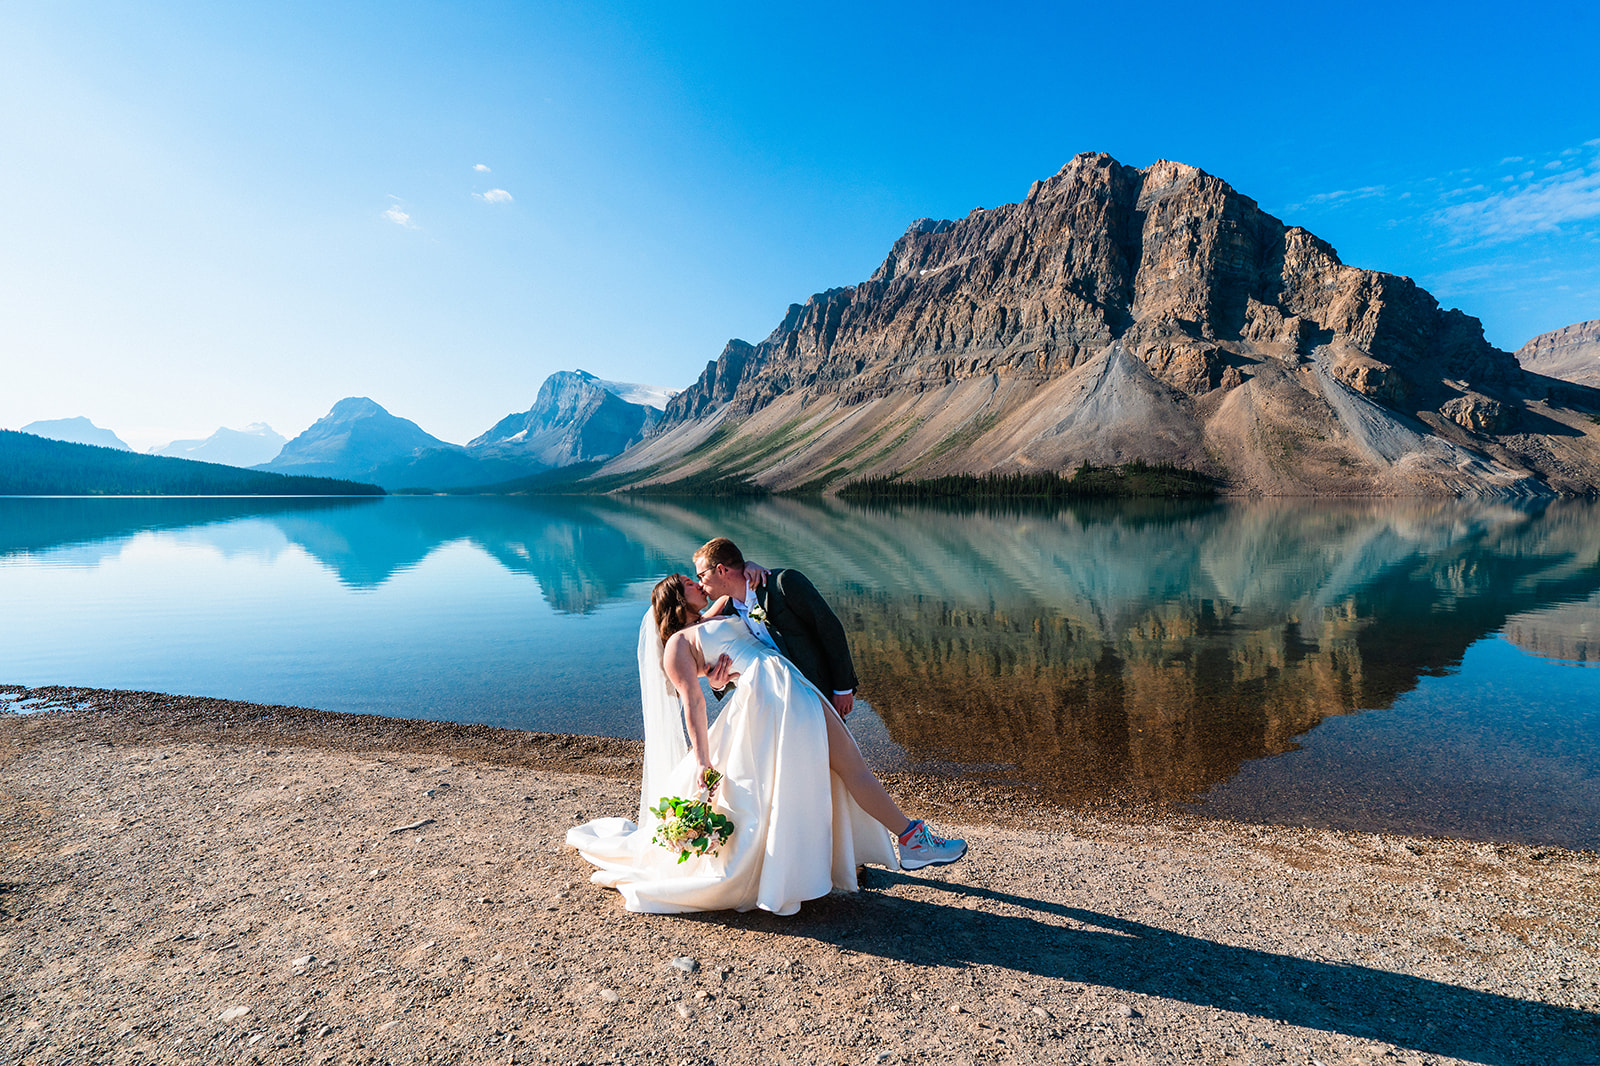 Groom dipping bride kissing her in front of a lake in Banff, Canada